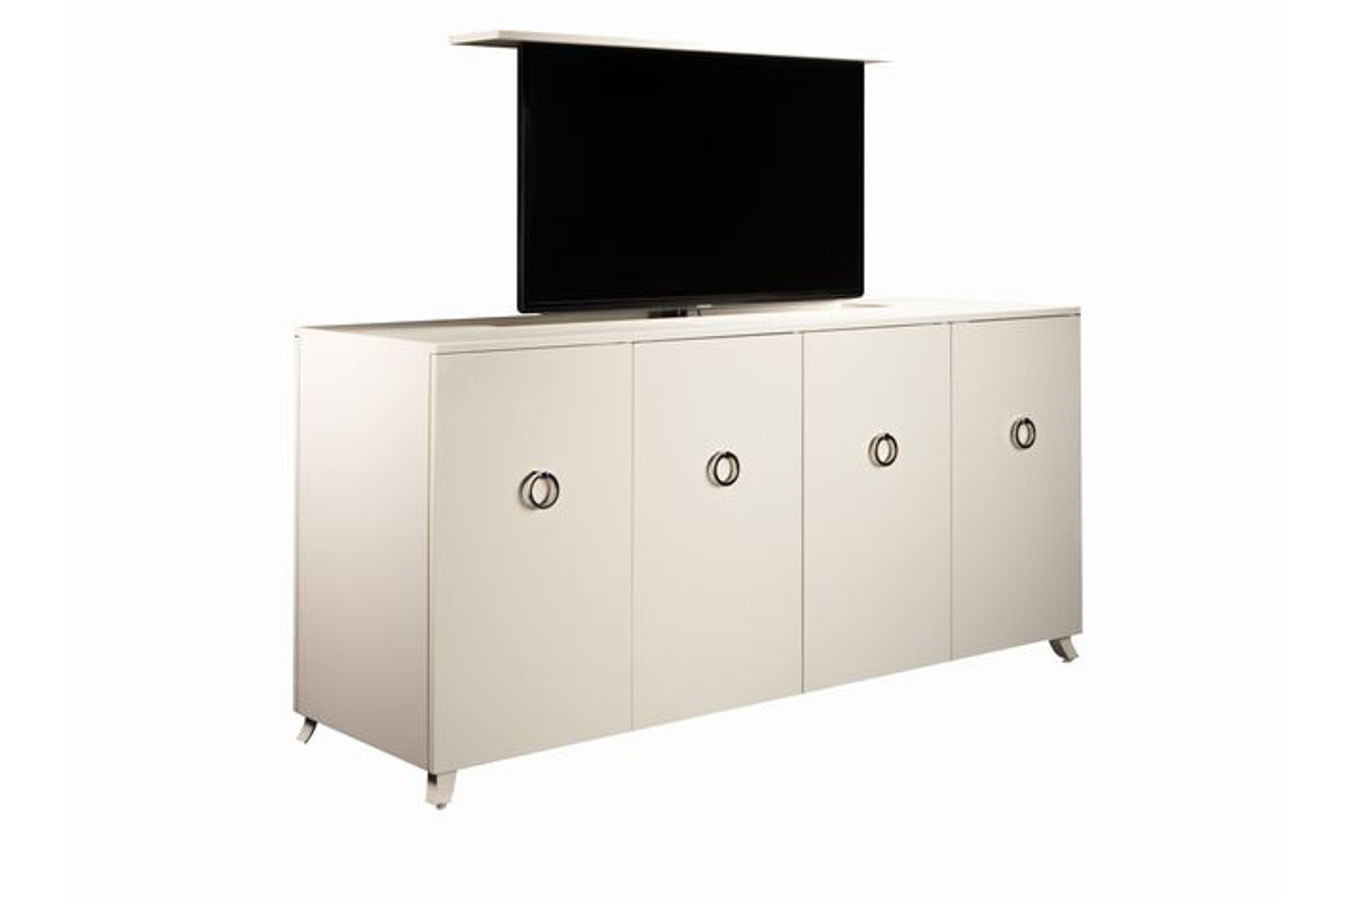 New York white gloss TV lift cabinet furniture built by Trace Mccullough at Cabinet Tronix